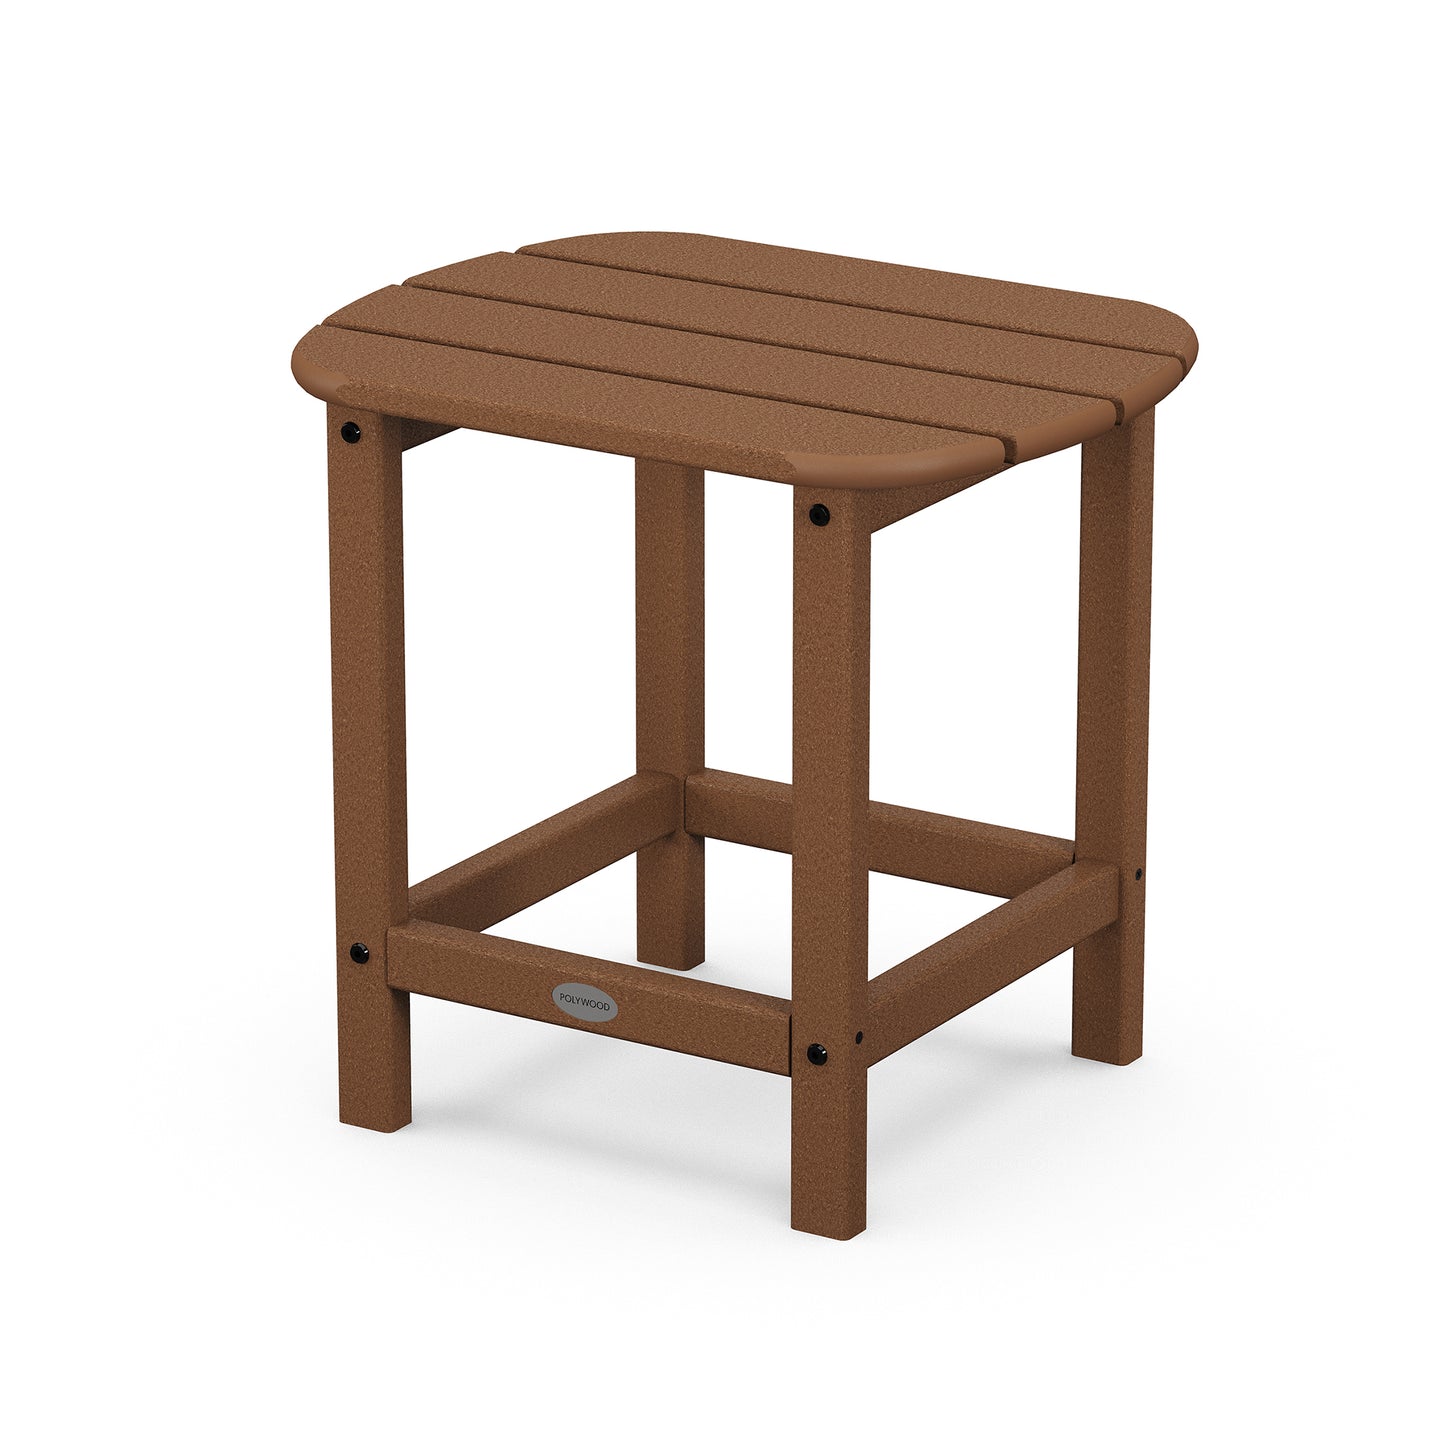 A simple brown, POLYWOOD® South Beach Adirondack 18" Side Table with a textured top, supported by four sturdy legs connected by horizontal bracing. This durable outdoor furniture stands isolated on a white background.